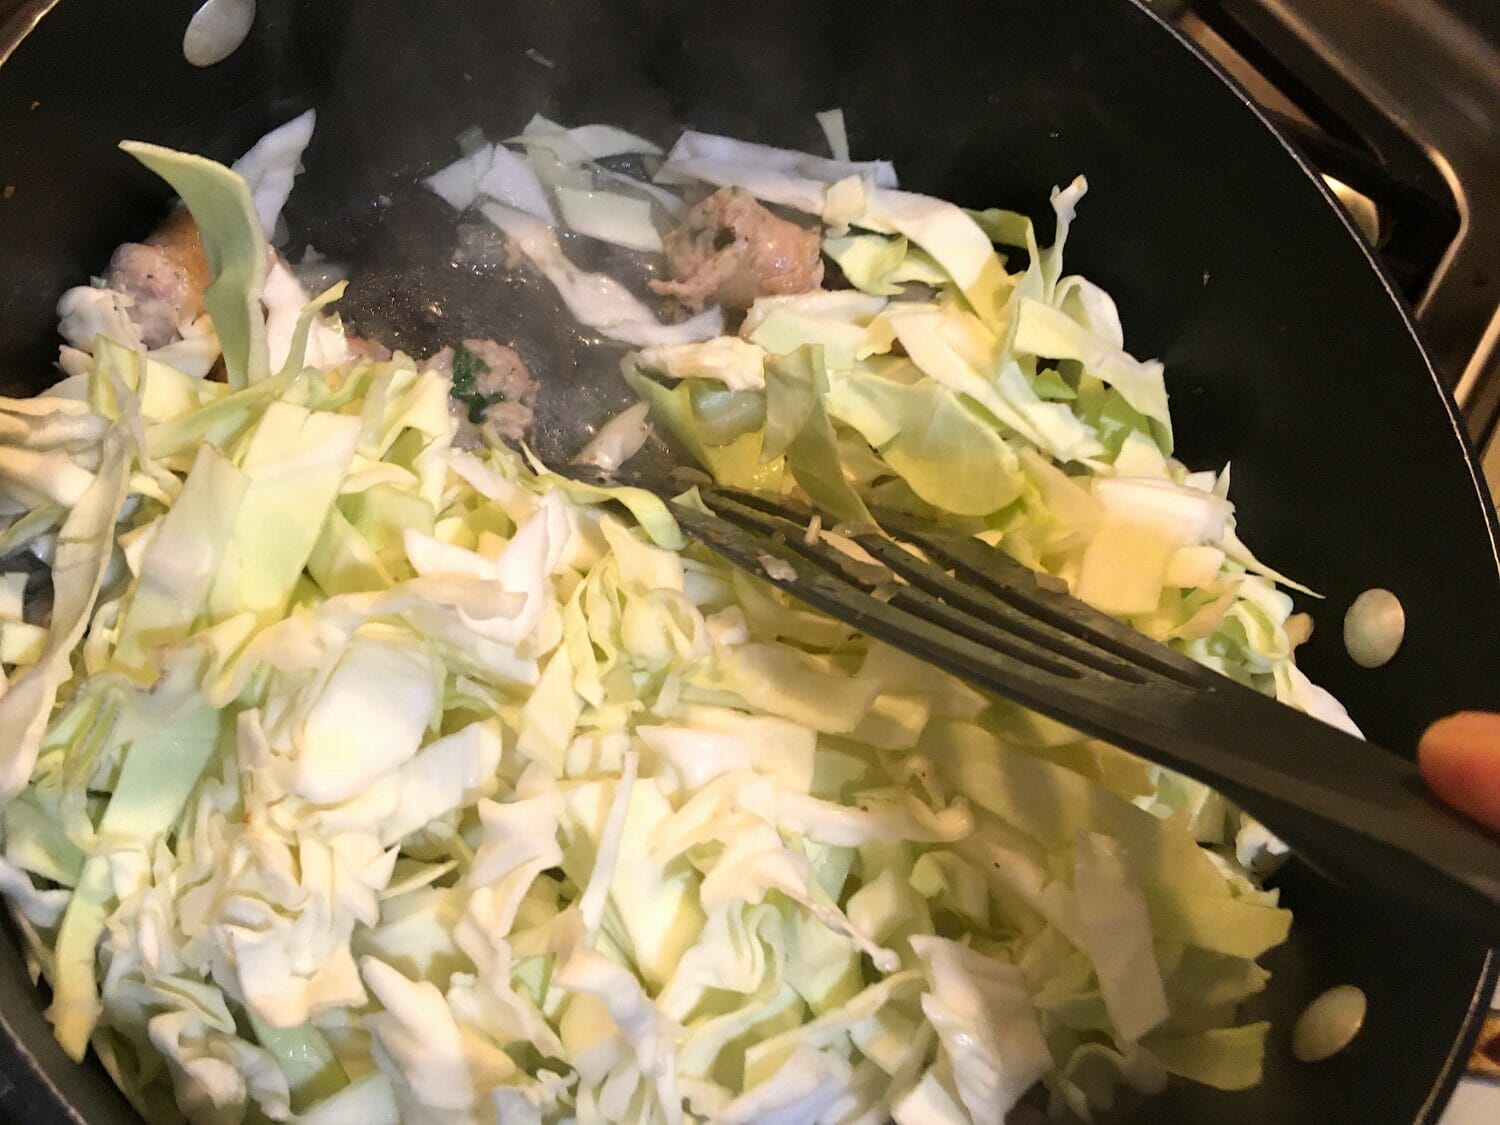 My mama's sweet cabbage recipe is the perfect fall side dish, but tweaking the ingredients transforms it into a tasty 30-minute one-pot meal.